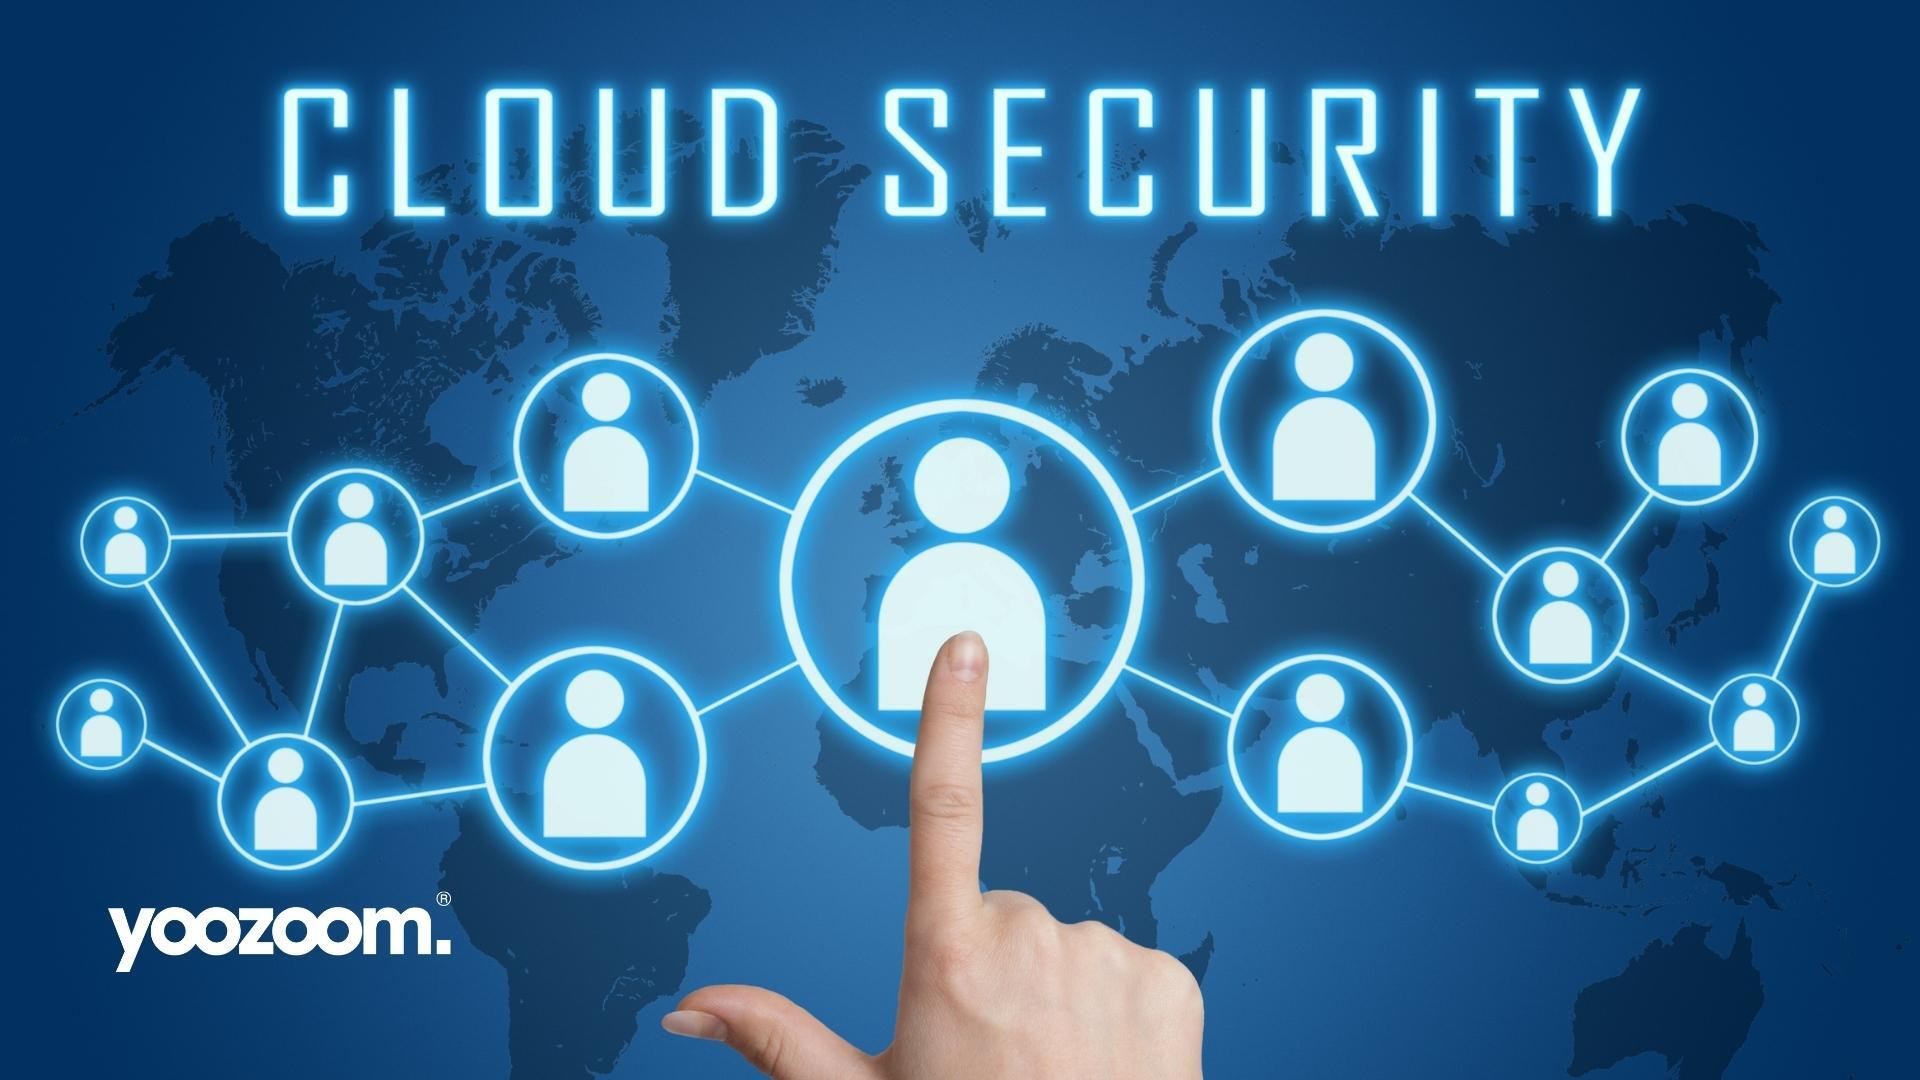 94% of all enterprises use cloud services – but do 94% know enough about cloud security? Read on to find out more about staying safe in the cloud.